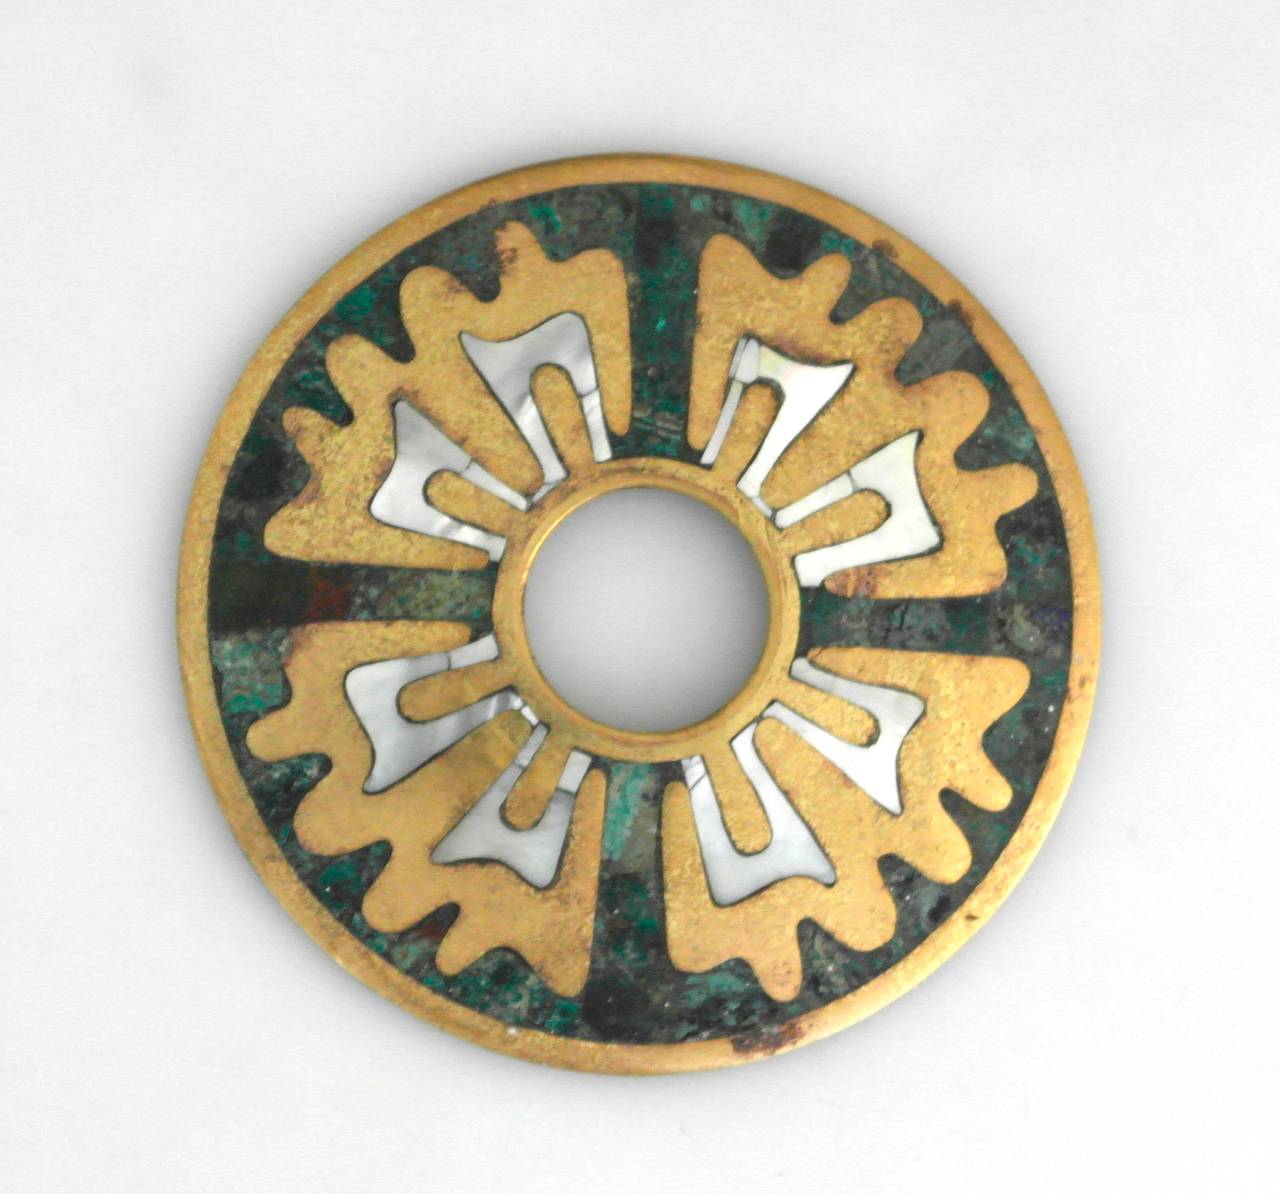 Being offered is a circa 1950s door plate by Los Castillo of Taxco, Mexico. Comprising a circular form door plate made of heavy gauge brass decorated with mother-of-pearl and azur malachite inlay. Dimensions: 4 3/4 inches diameter (1 1/4 inches